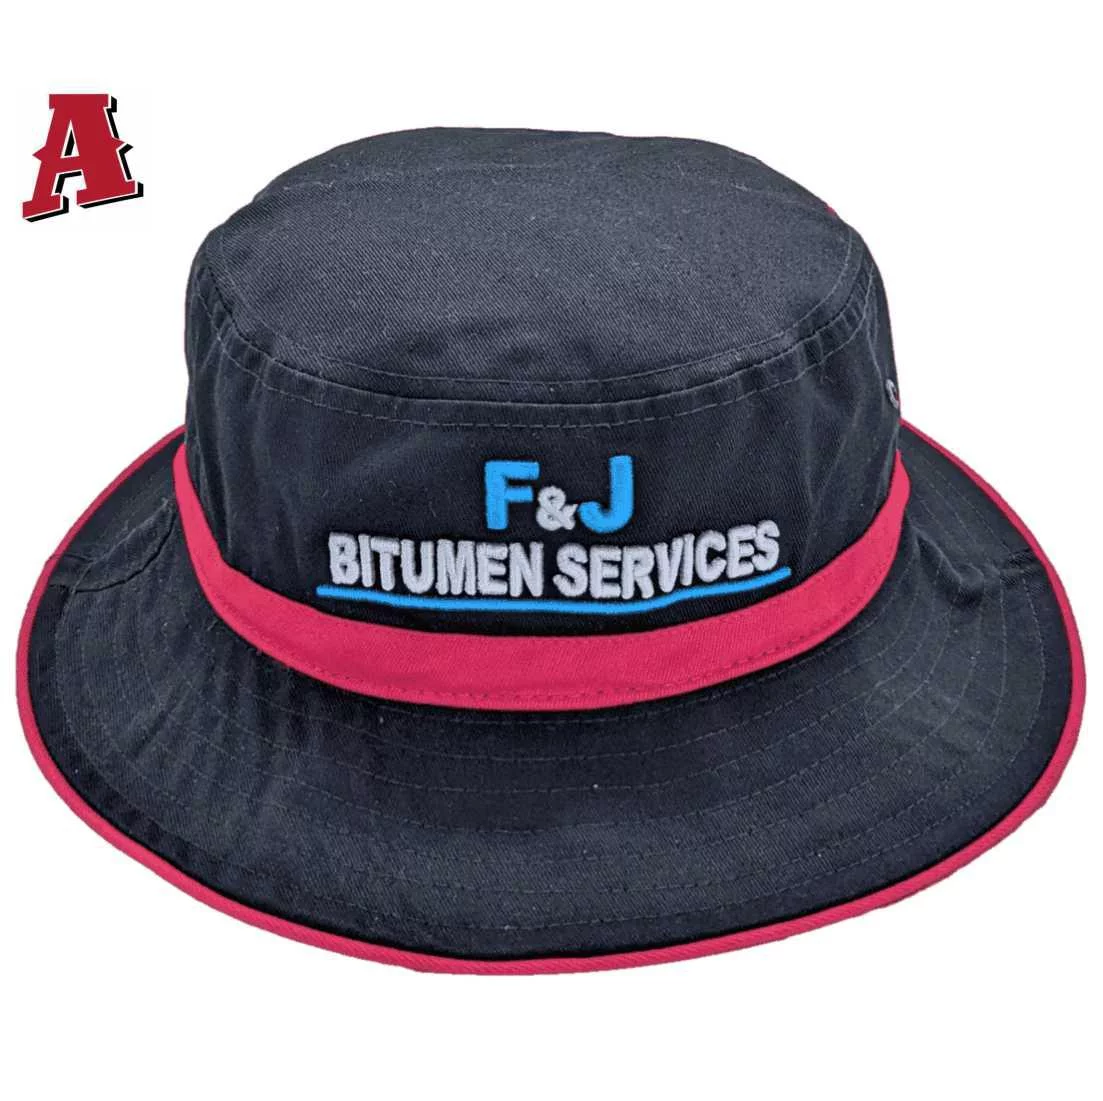 F&J Bitumen Services Humpty Doo NT Aussie Bucket Hat One Size Fits All with Optional Brim Size 5cm to 7.5cm Black Red